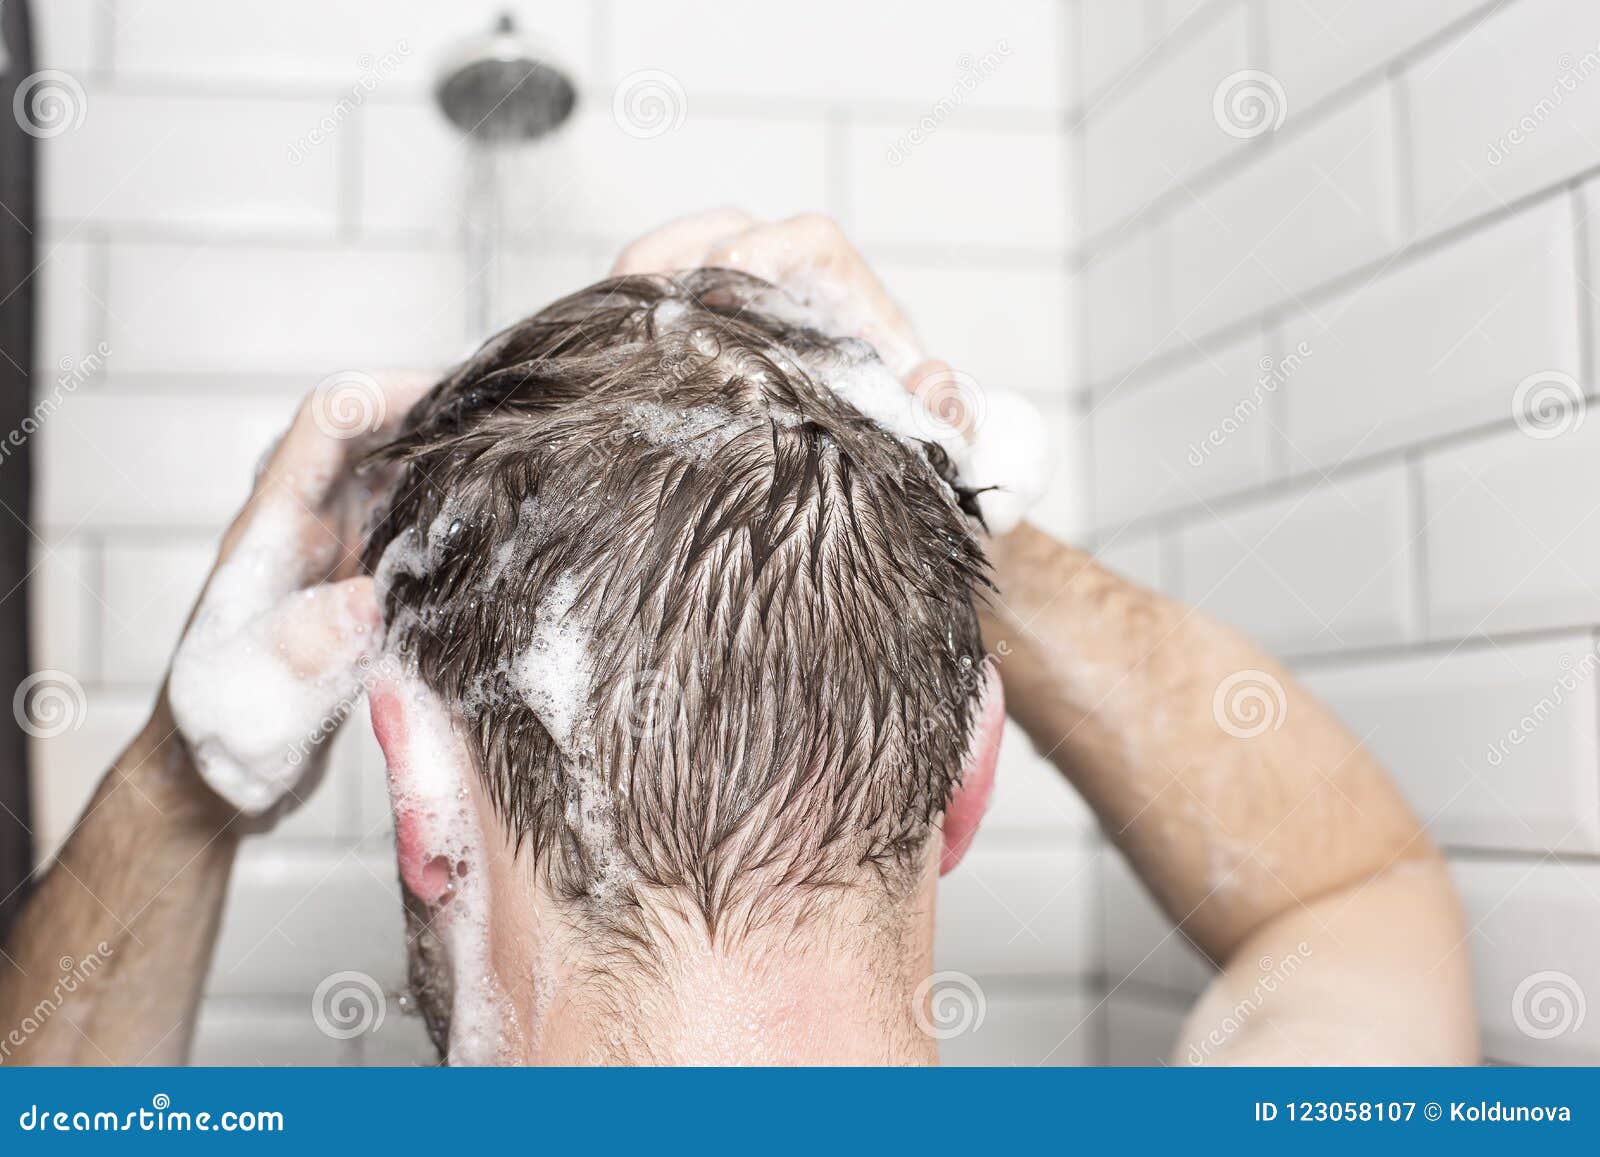 A Man Washing Her Hair with Shampoo in the Shower Room. Stock Image - Image  of happy, hairy: 123058107